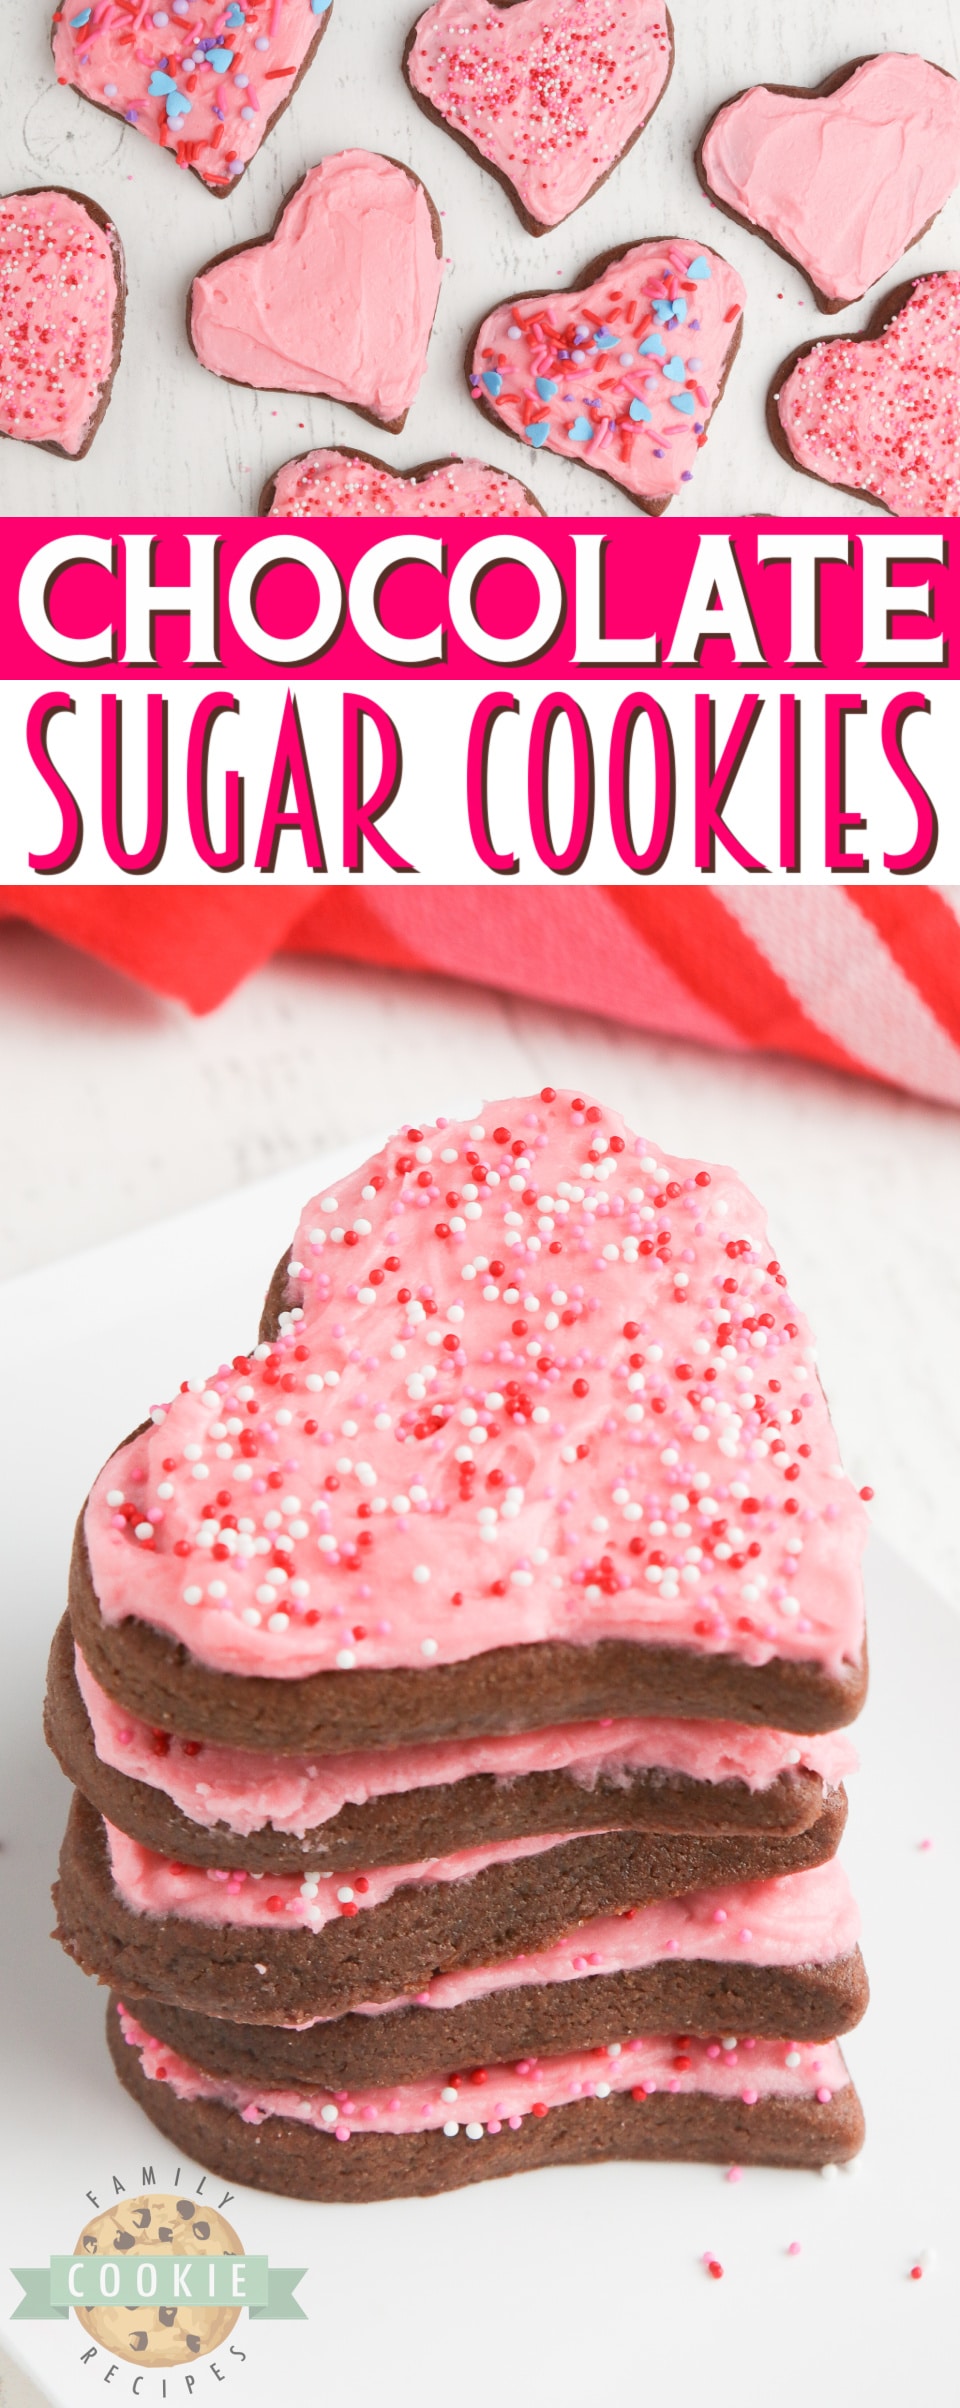 Chocolate Sugar Cookies are soft, rich and perfect for cutting out shapes and making holiday cookies. Easy chocolate sugar cookie recipe that is absolutely delicious! via @buttergirls